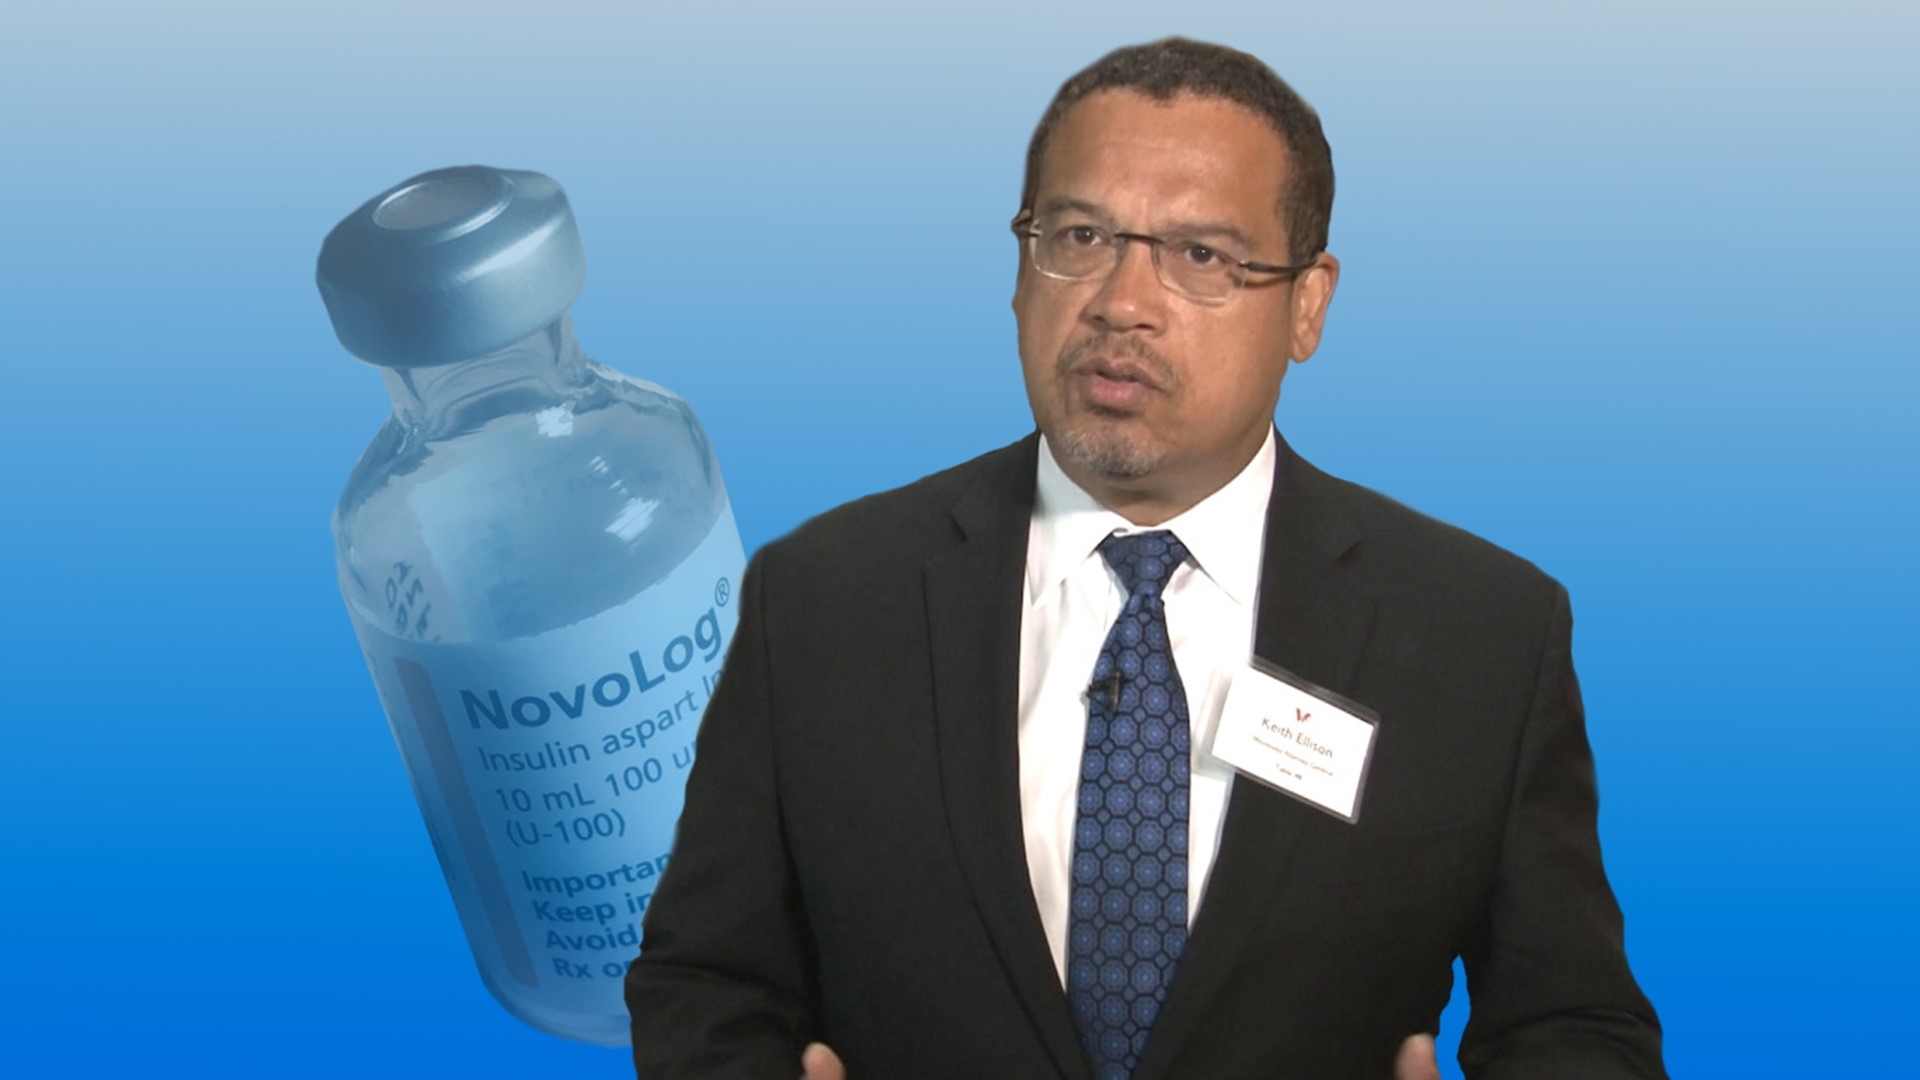 Attorney General Keith Ellison says state is fighting pharmaceutical industry group's lawsuit that seeks to end Minnesota's new emergency insulin supply program